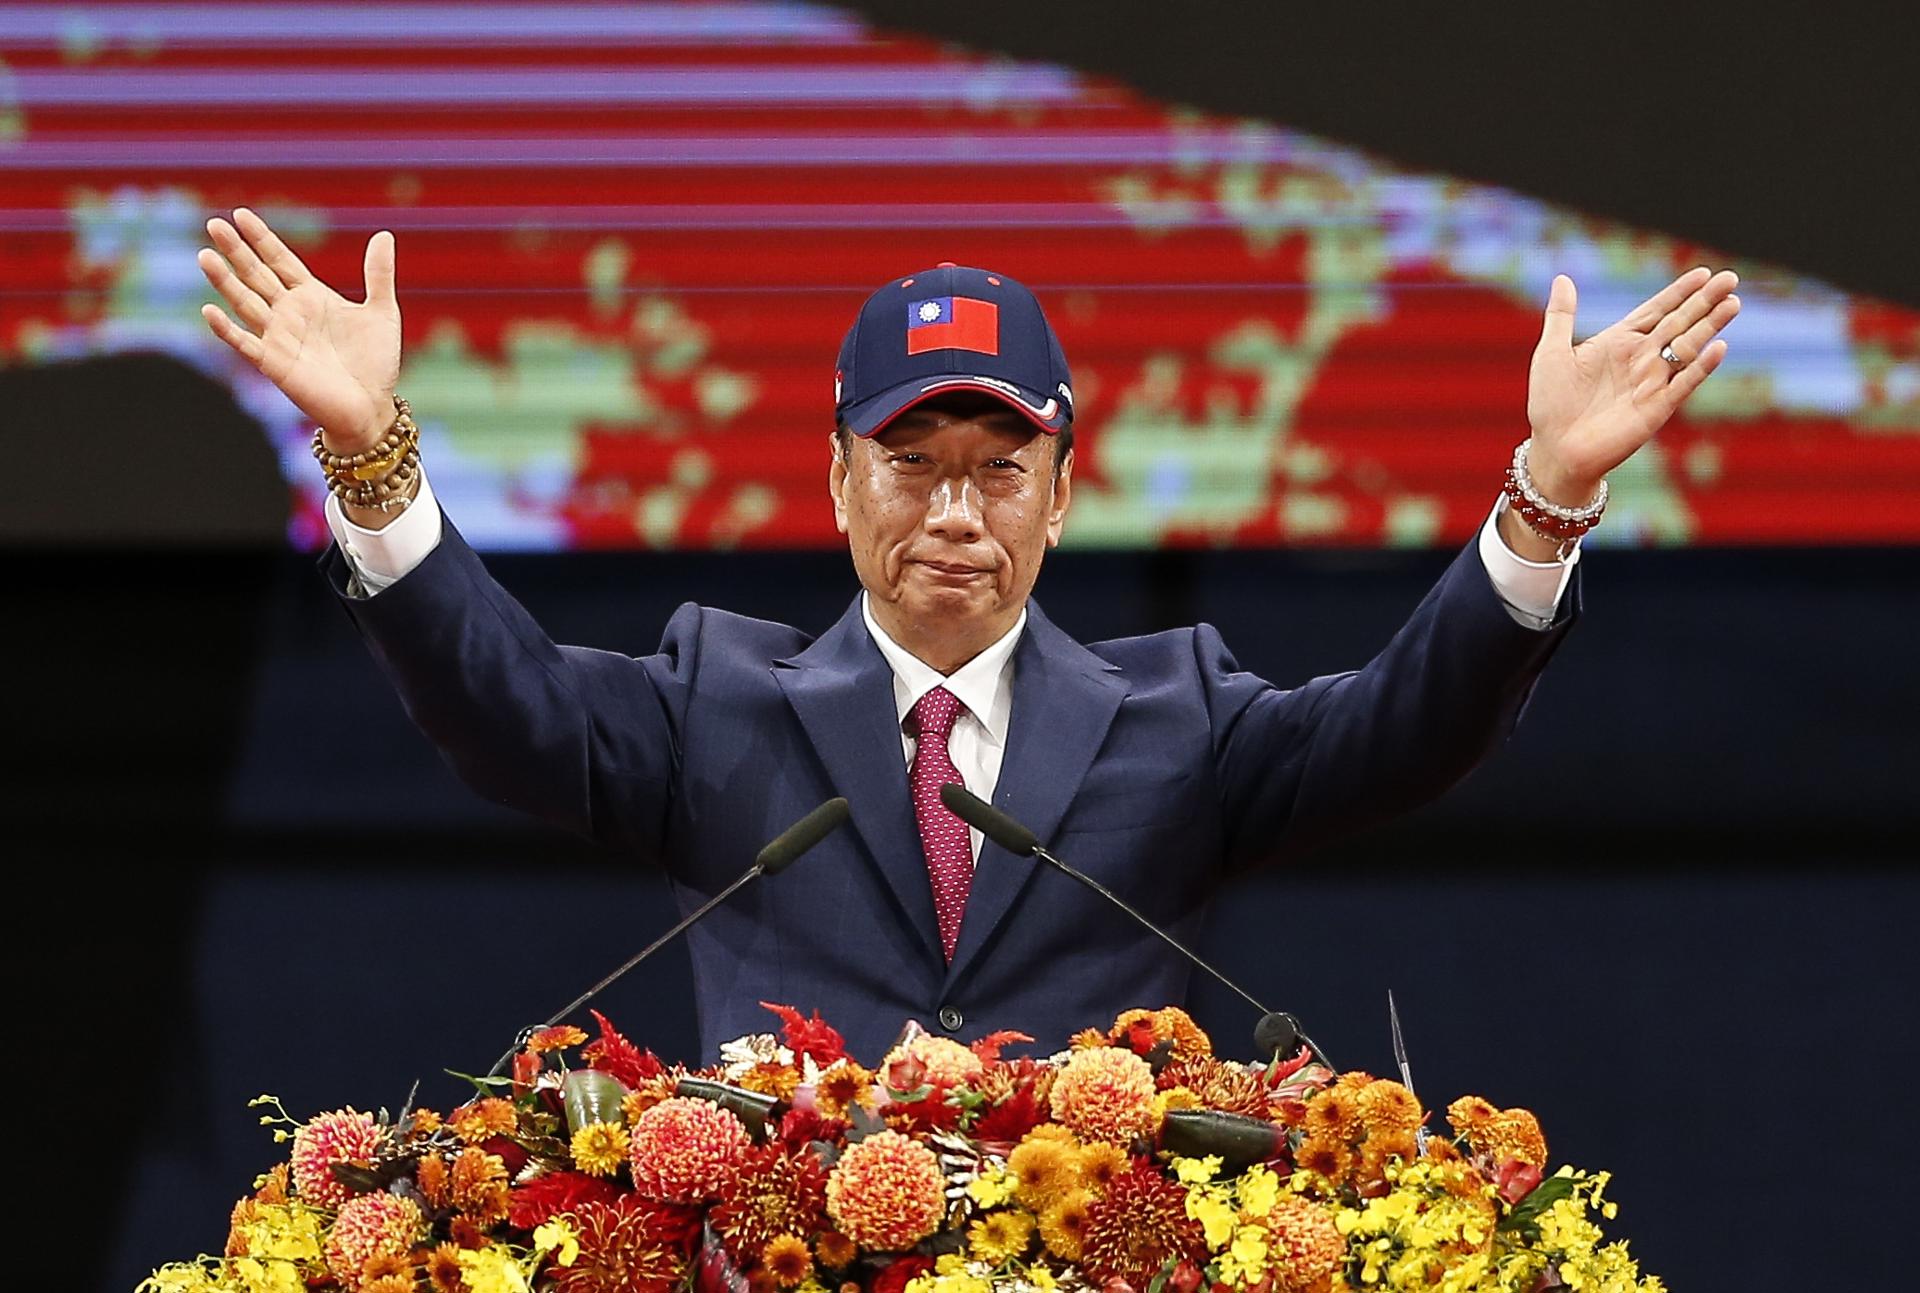 Terry Gou, Chairman of Foxconn, speaks during the Foxconn year end party in Taipei, Taiwan, 02 February 2019. EFE-EPA/RITCHIE B. TONGO/FILE